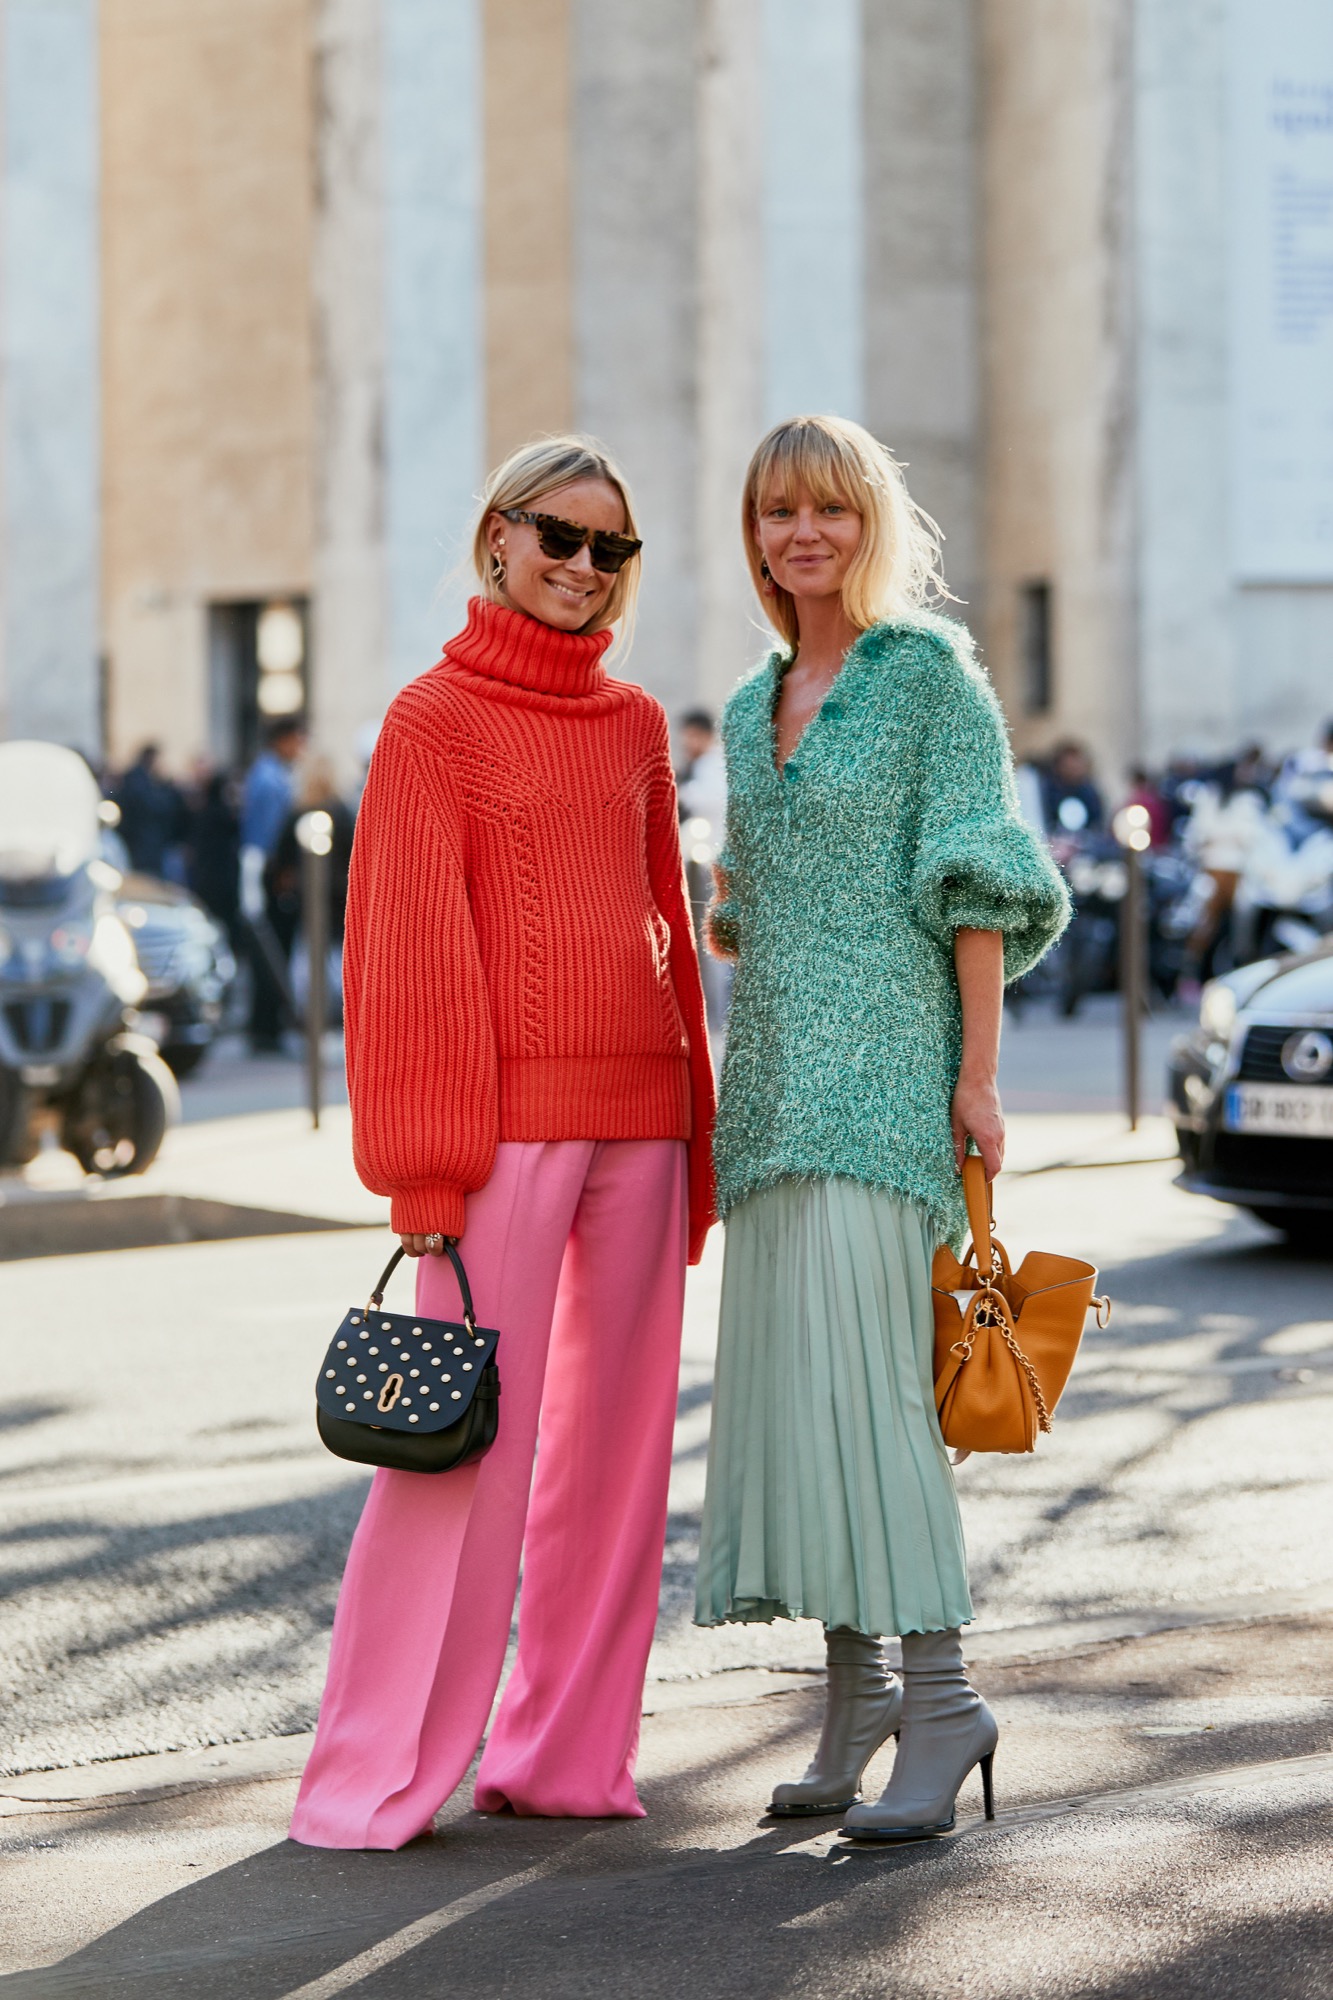 How to Look Younger: Wear Color